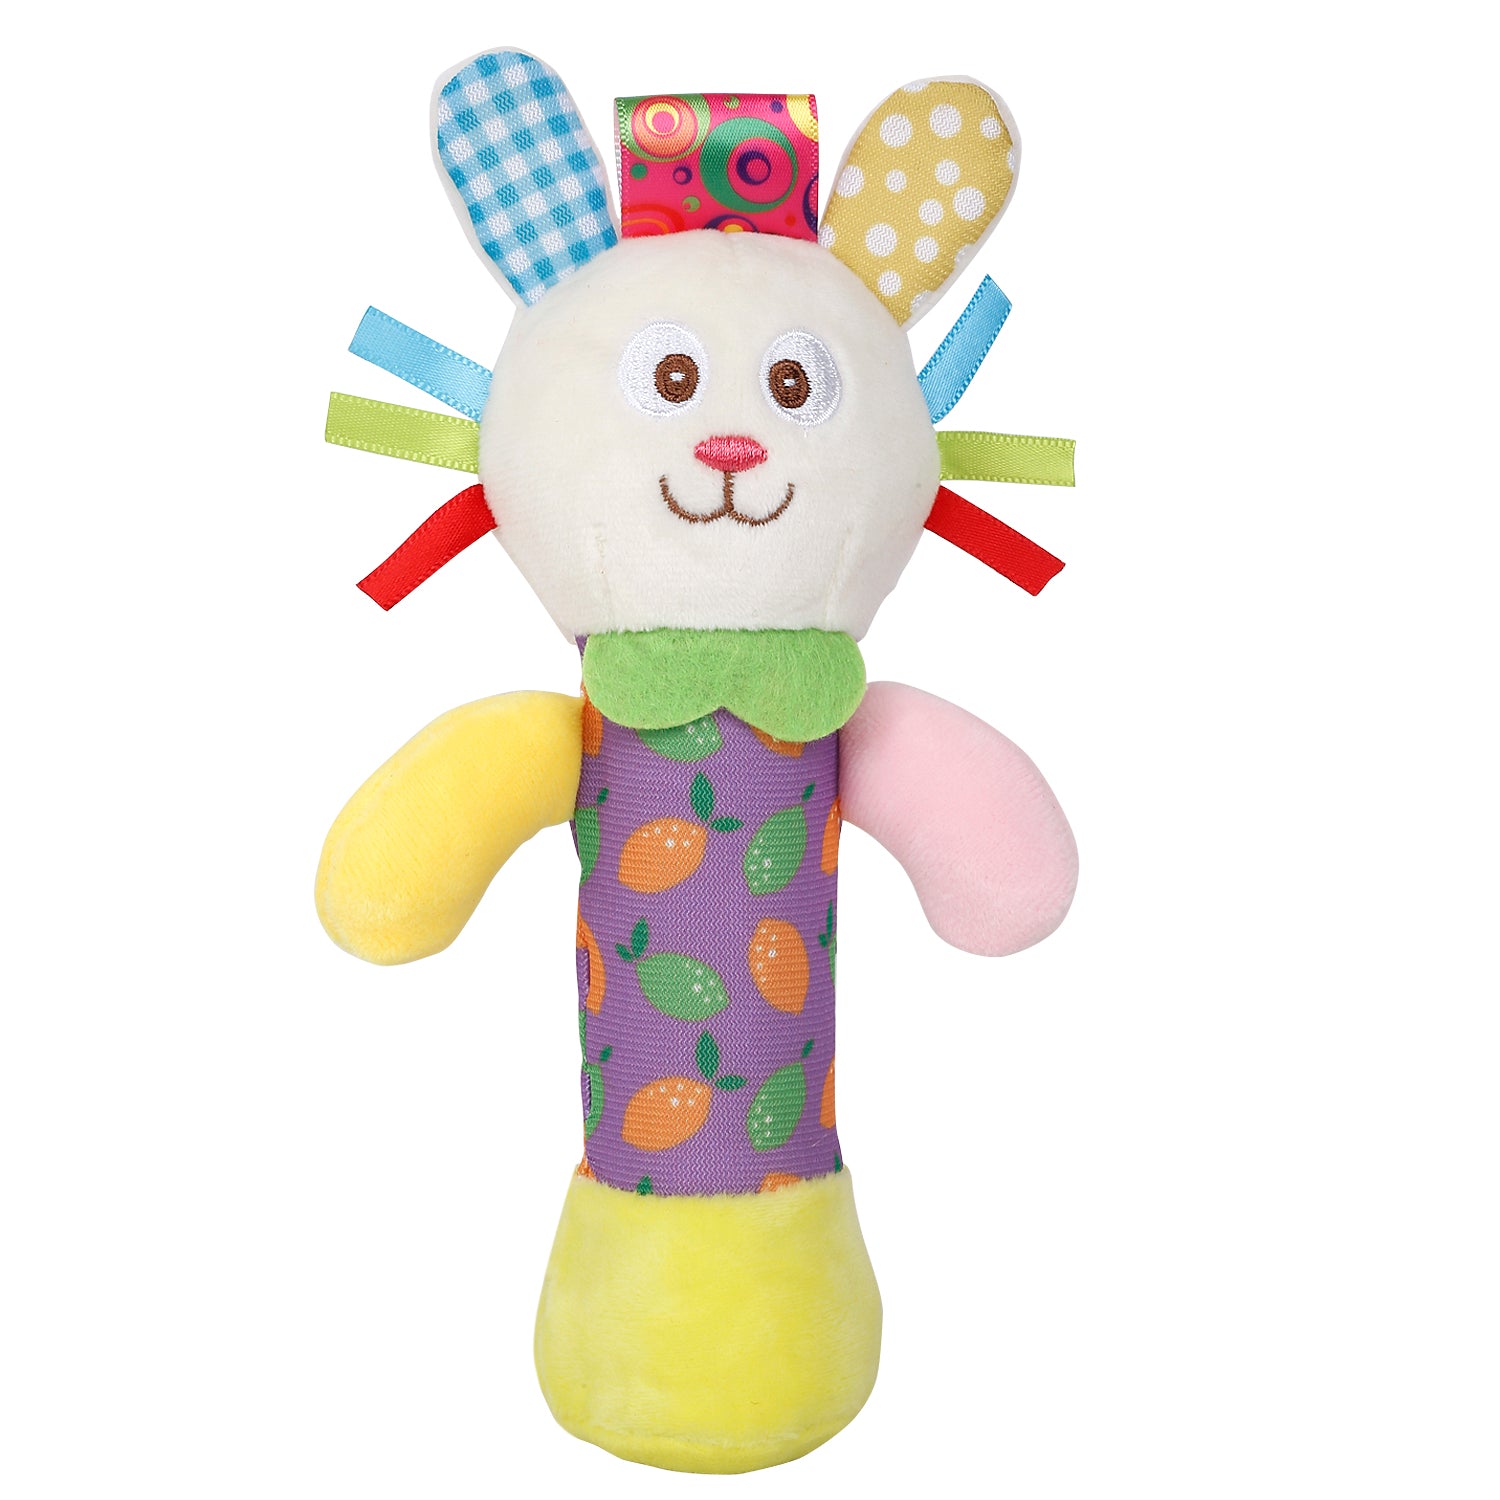 Hungry Rabbit Multicolour Handheld Rattle Toy